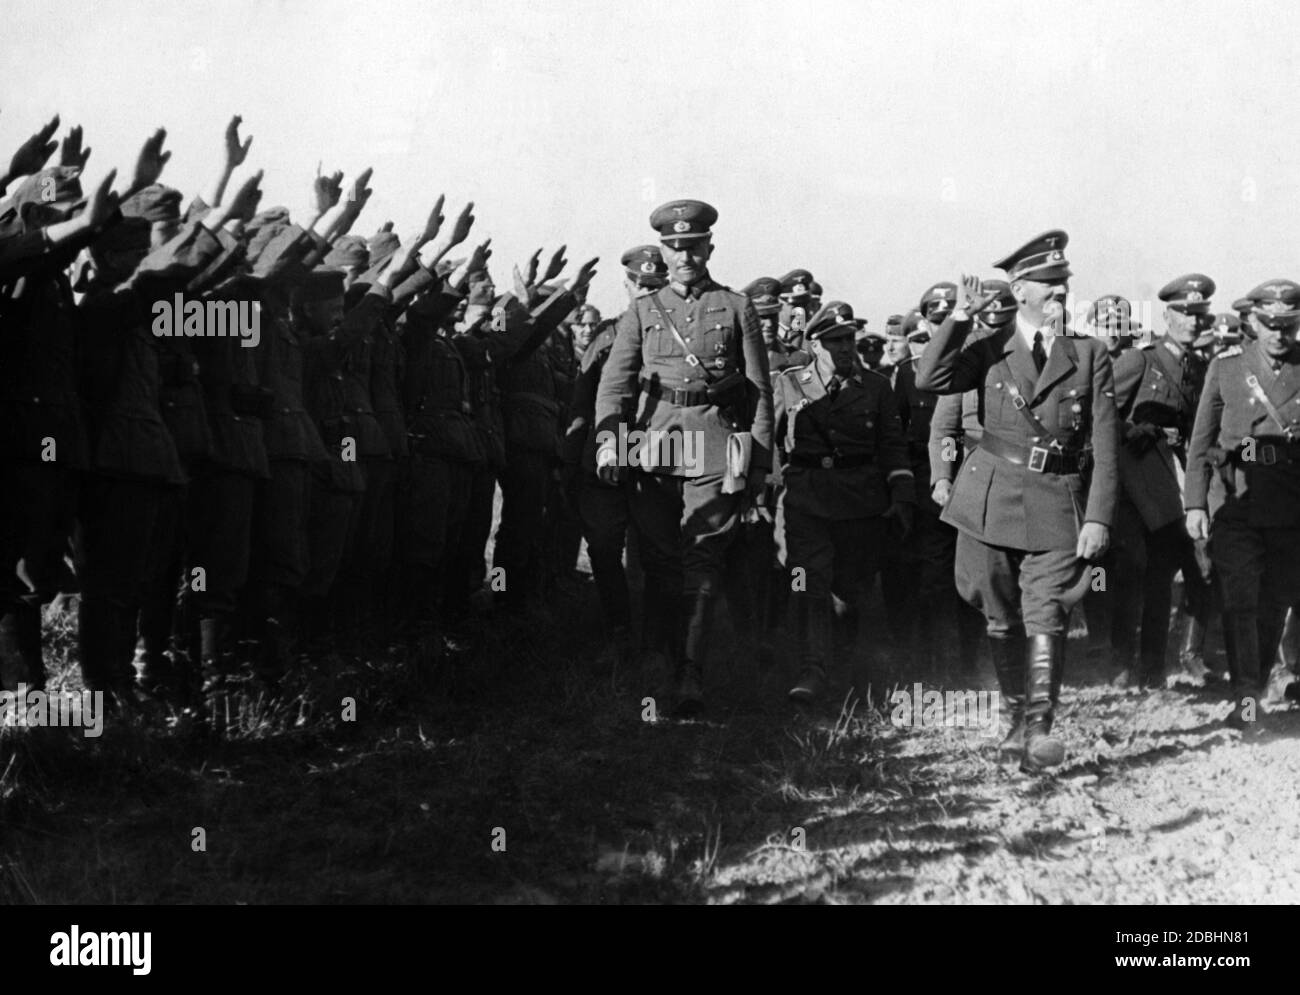 Adolf Hitler visits troops before they cross the Vistula. He is accompanied by Martin Bormann (left behind Hitler) and Reinhard Heydrich (right behind Hitler). Stock Photo